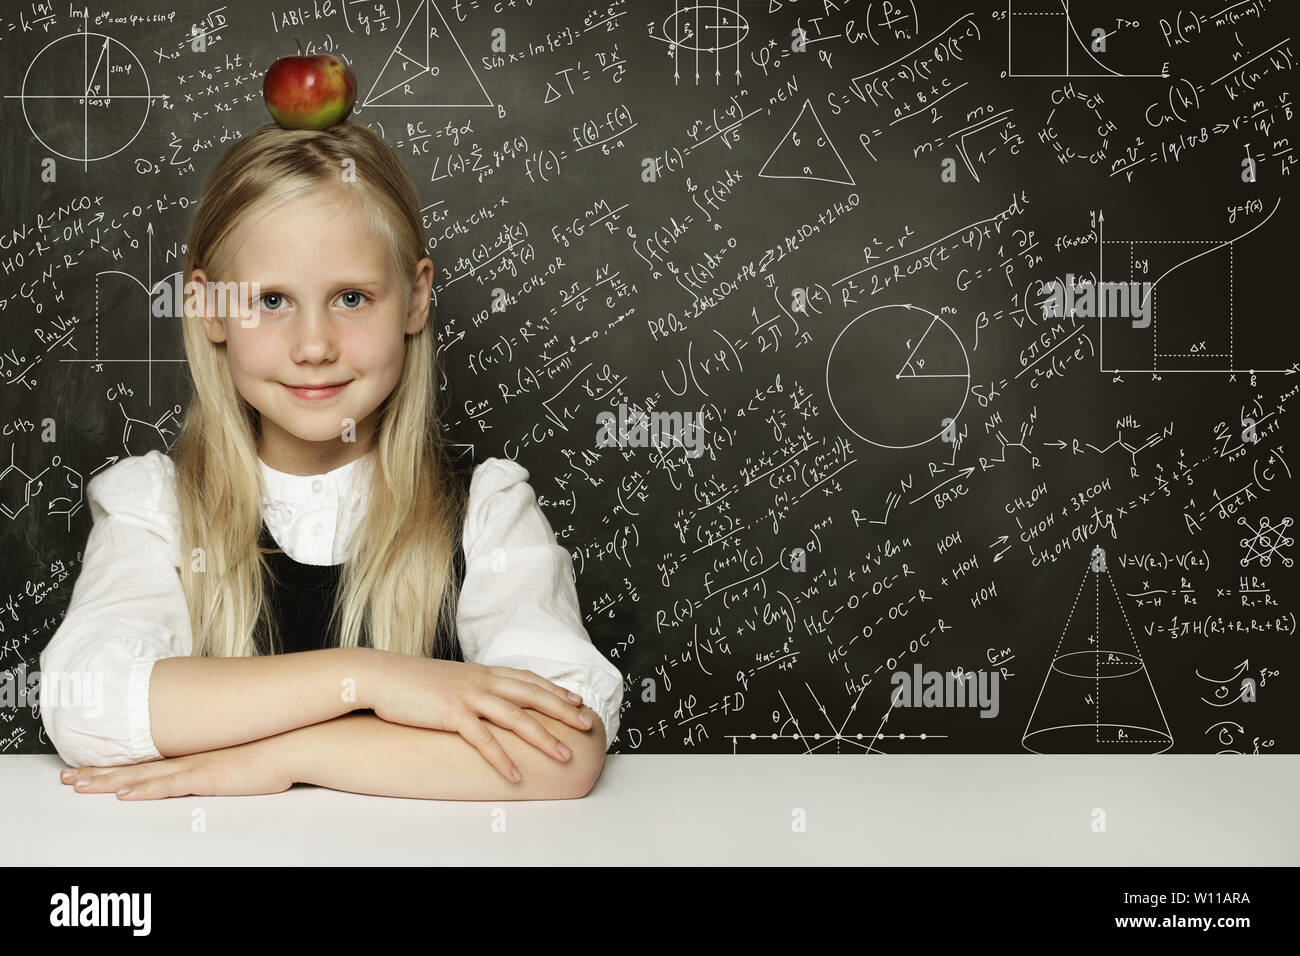 Cute child student girl with red apple on head. Blackboard background with science formulas. Learning science concept. Stock Photo